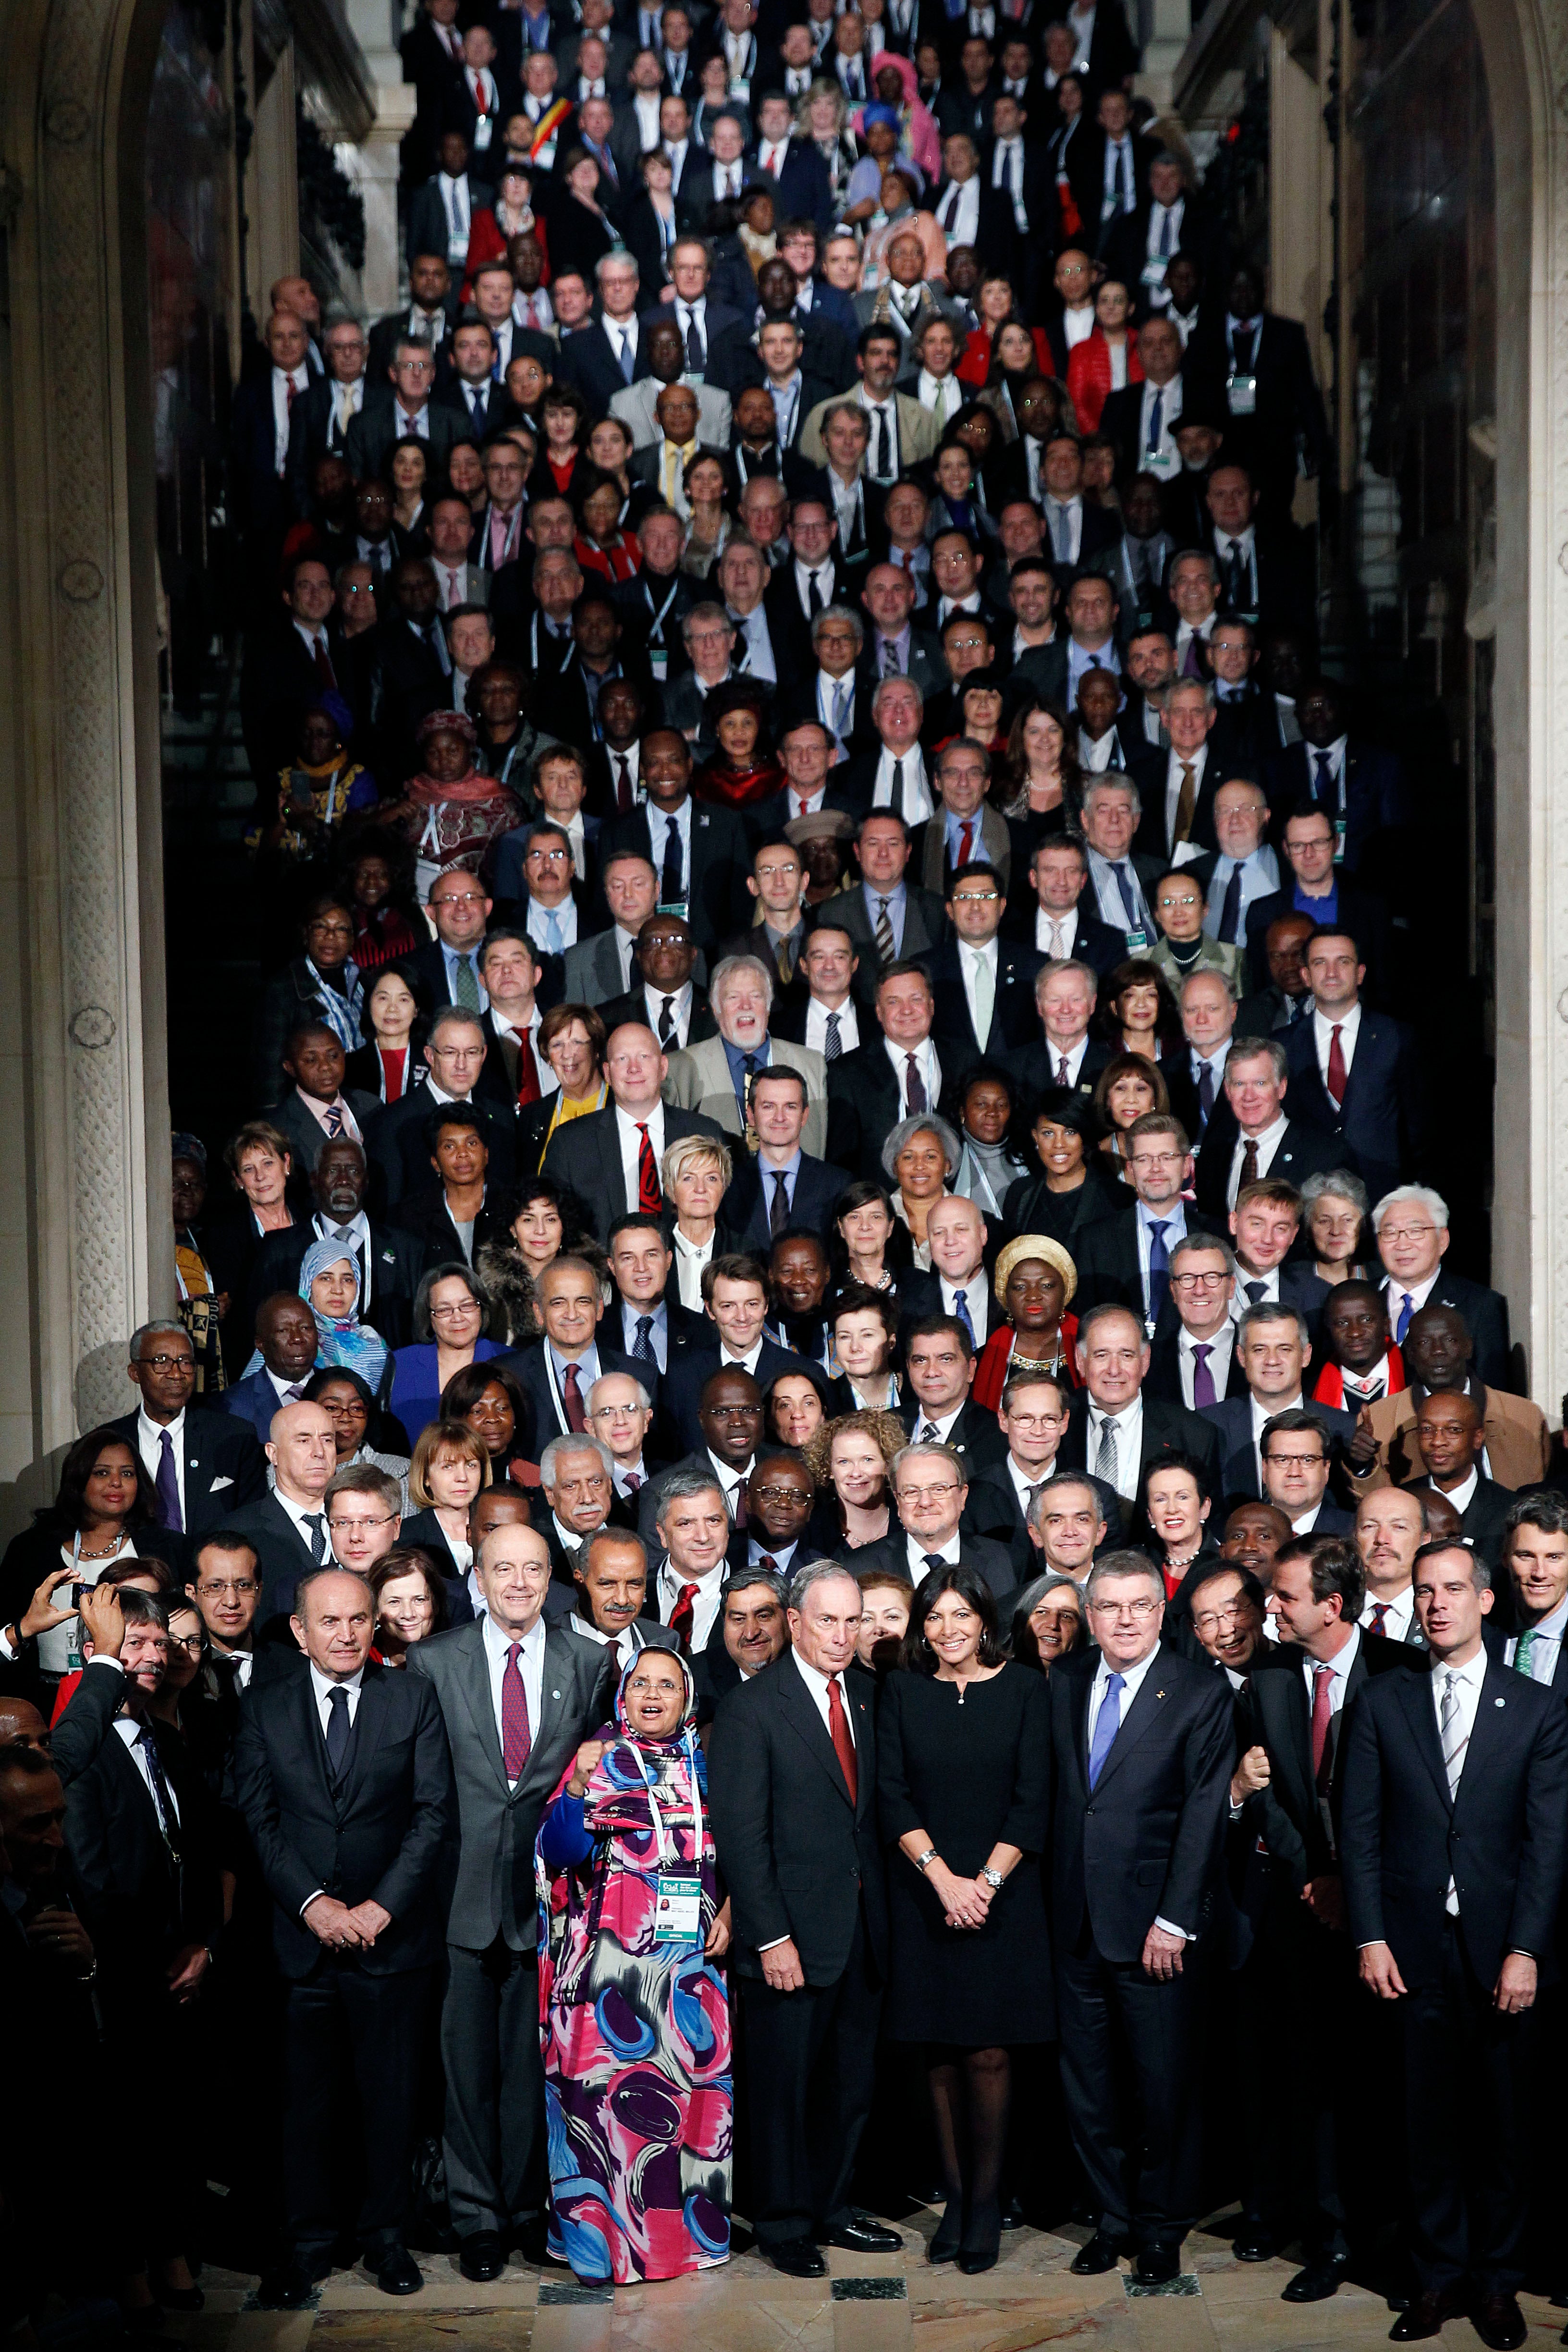 Thousand mayors from different cities gather at the Paris city hall during the COP21 Paris Climate Conference